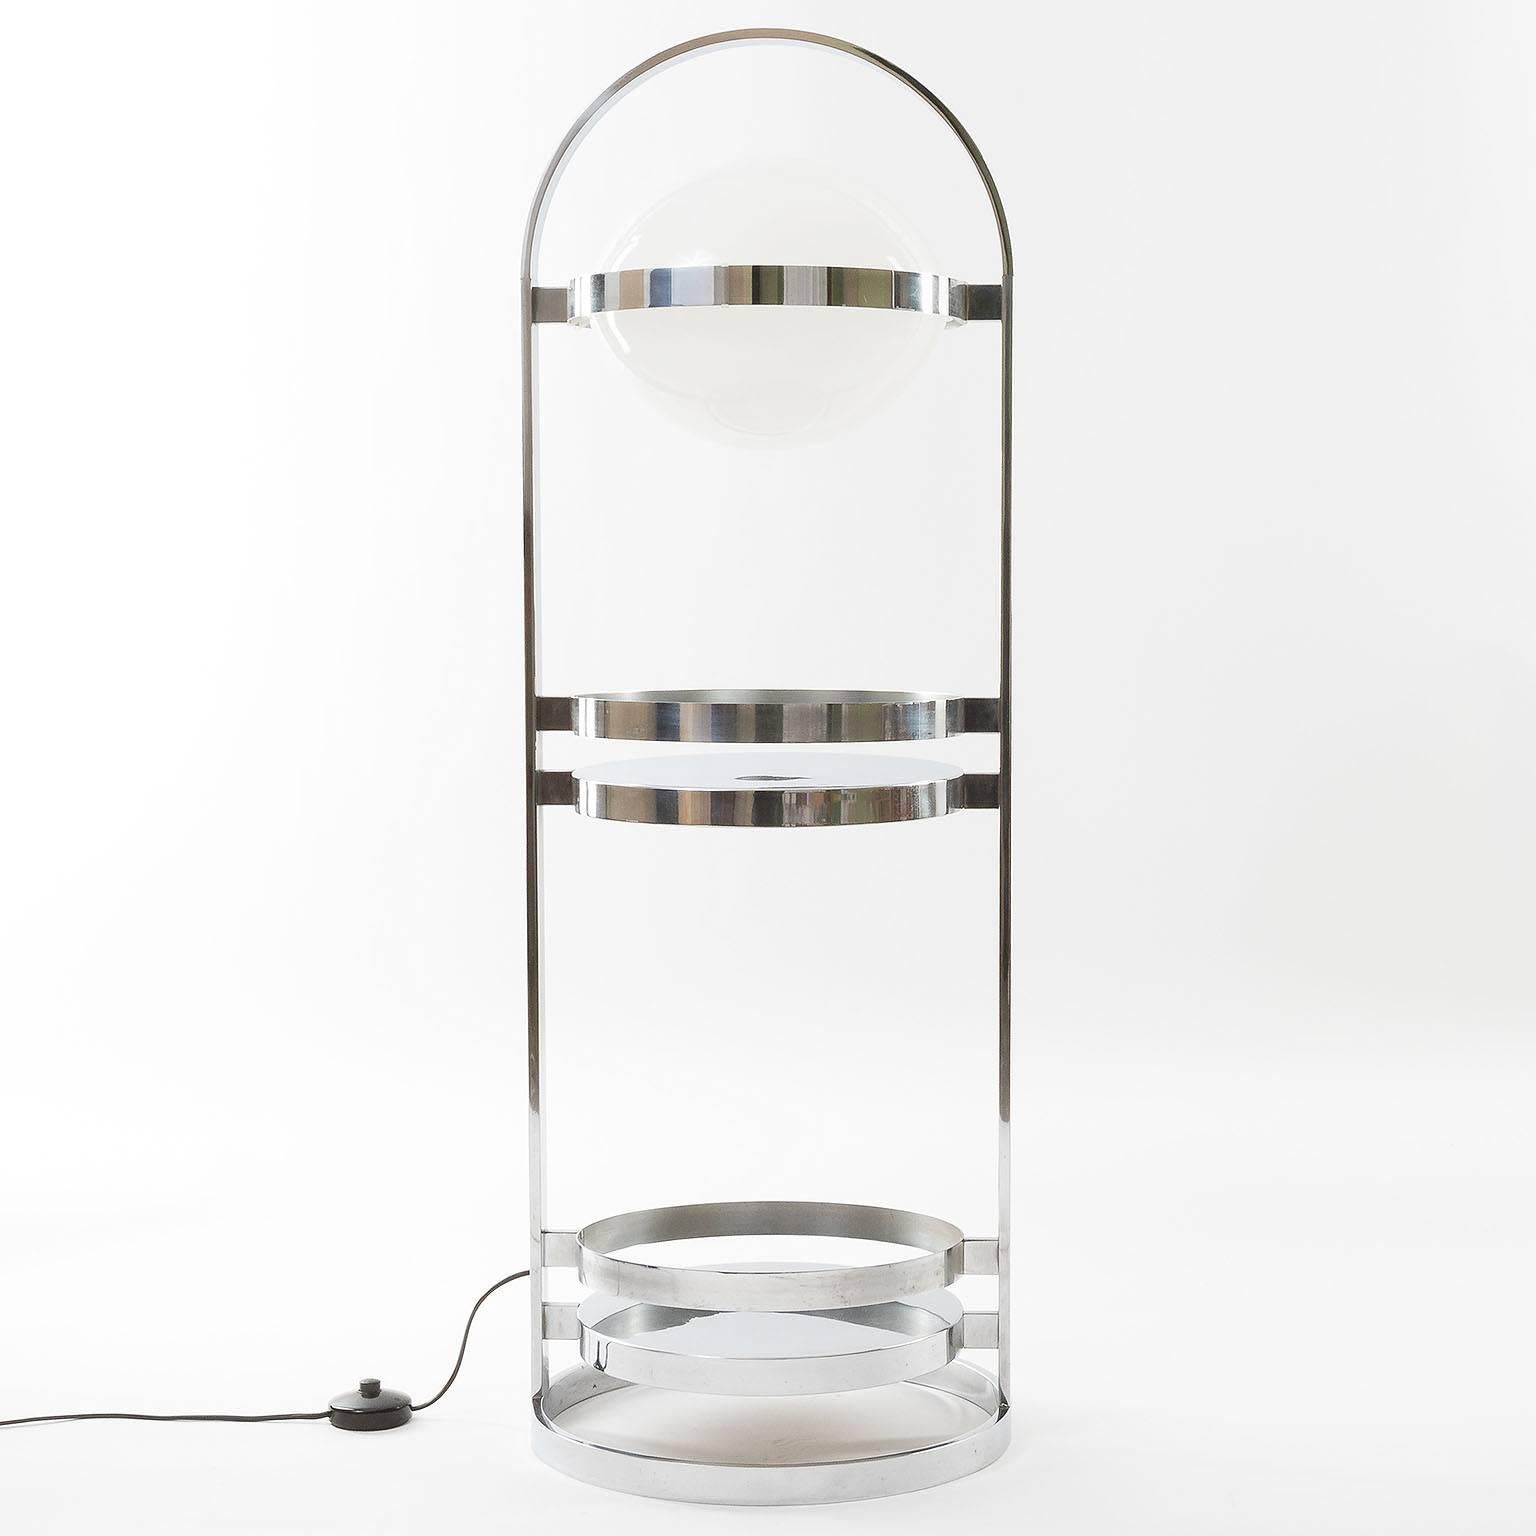 A rare Sapce Age floor lamp with two shelfs by Vest Leuchten, Austria, manufactured in Mid-Century in 1970s. A chromed metal frame holds an illuminated acryl glass globe. This item was a selected object for a design centre (see label).